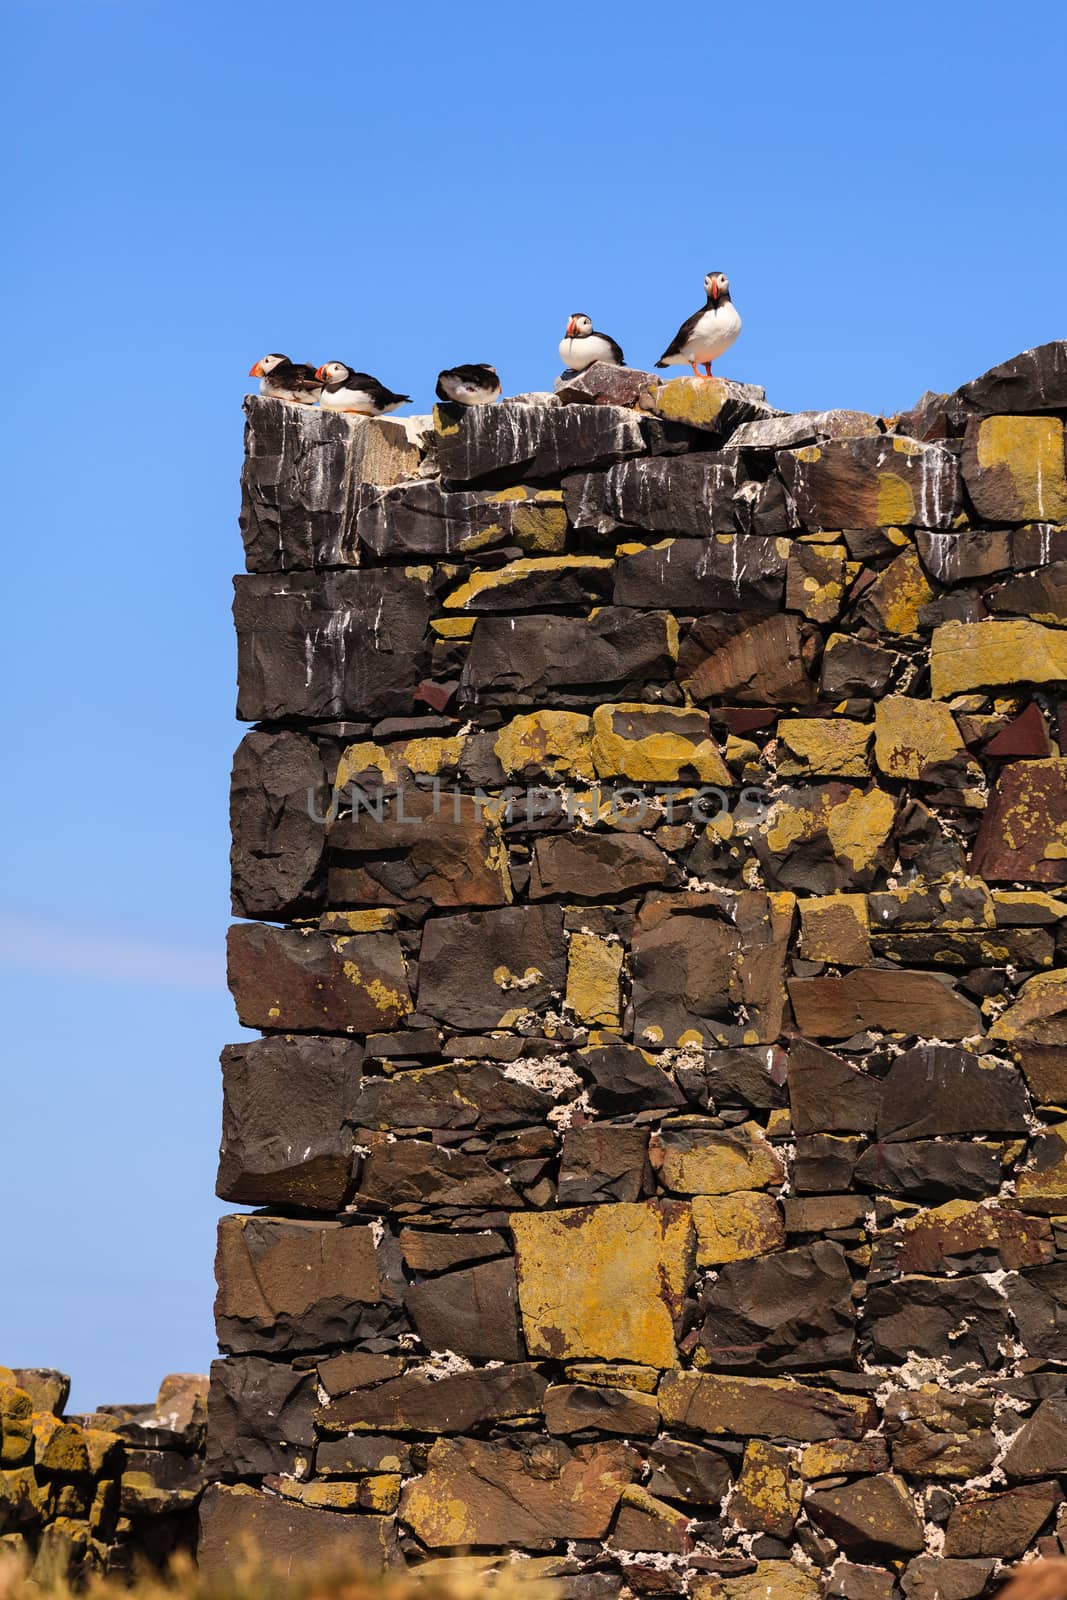 Puffins roosting on the Farne Islands, Northumberland in North East England.